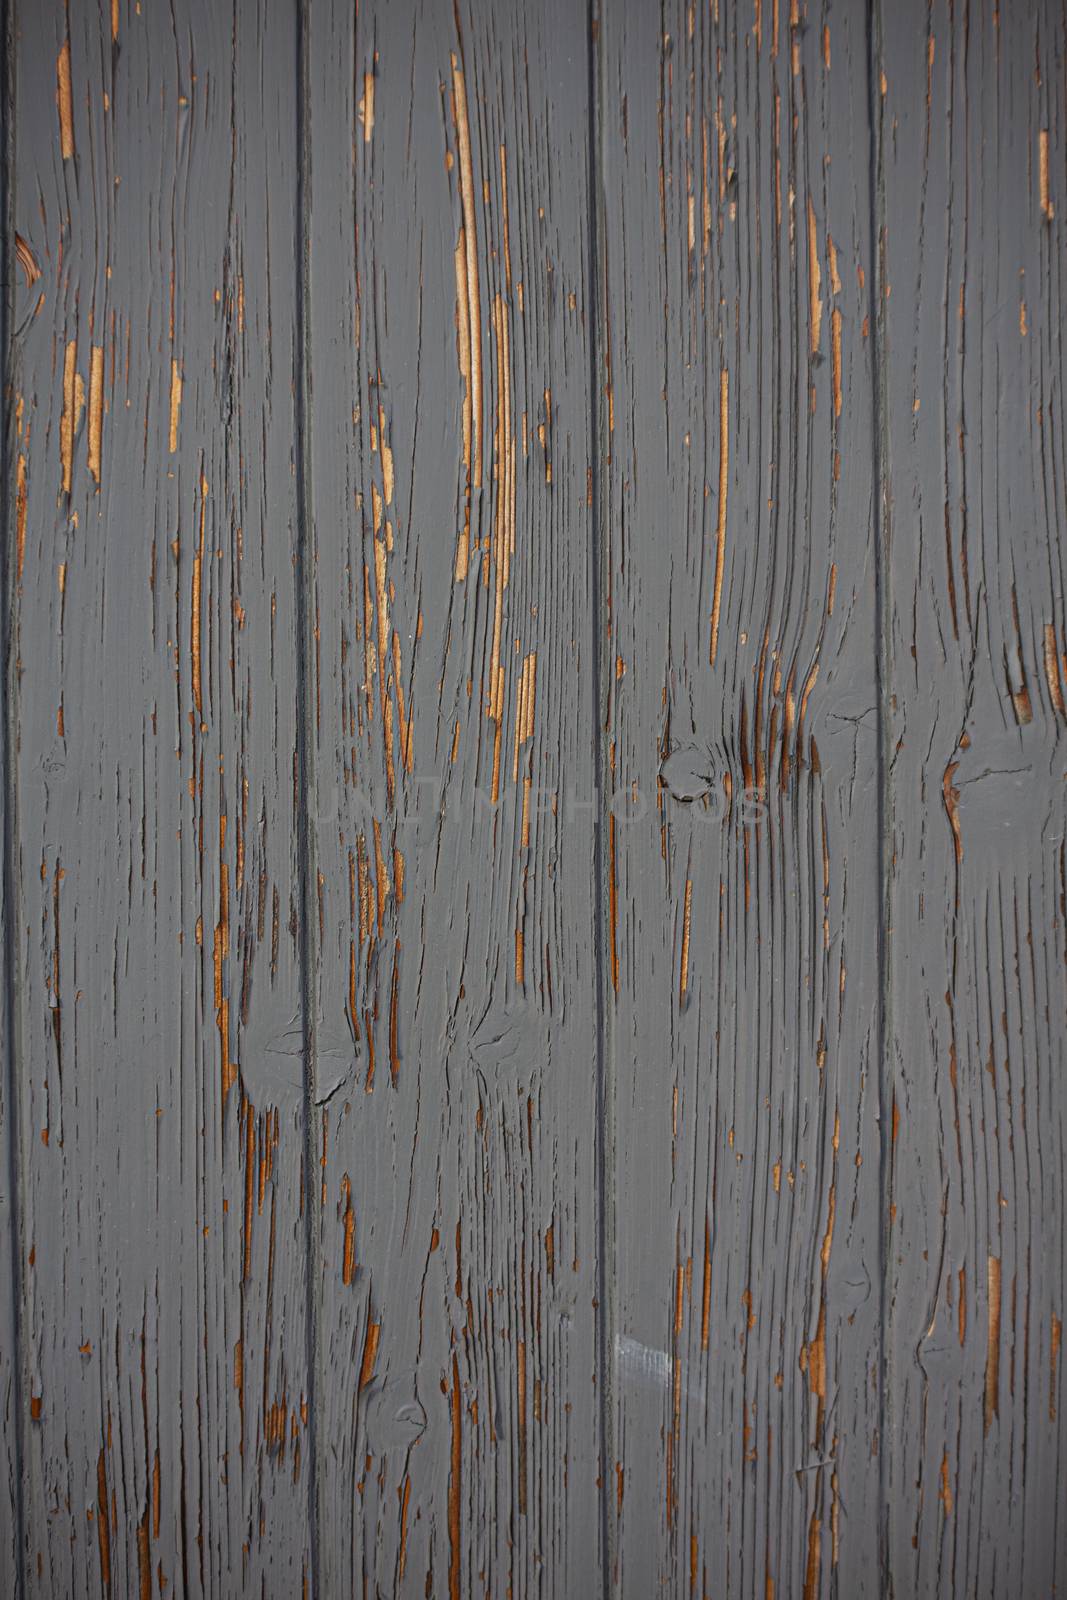 Wood texture with peeling paint by pippocarlot